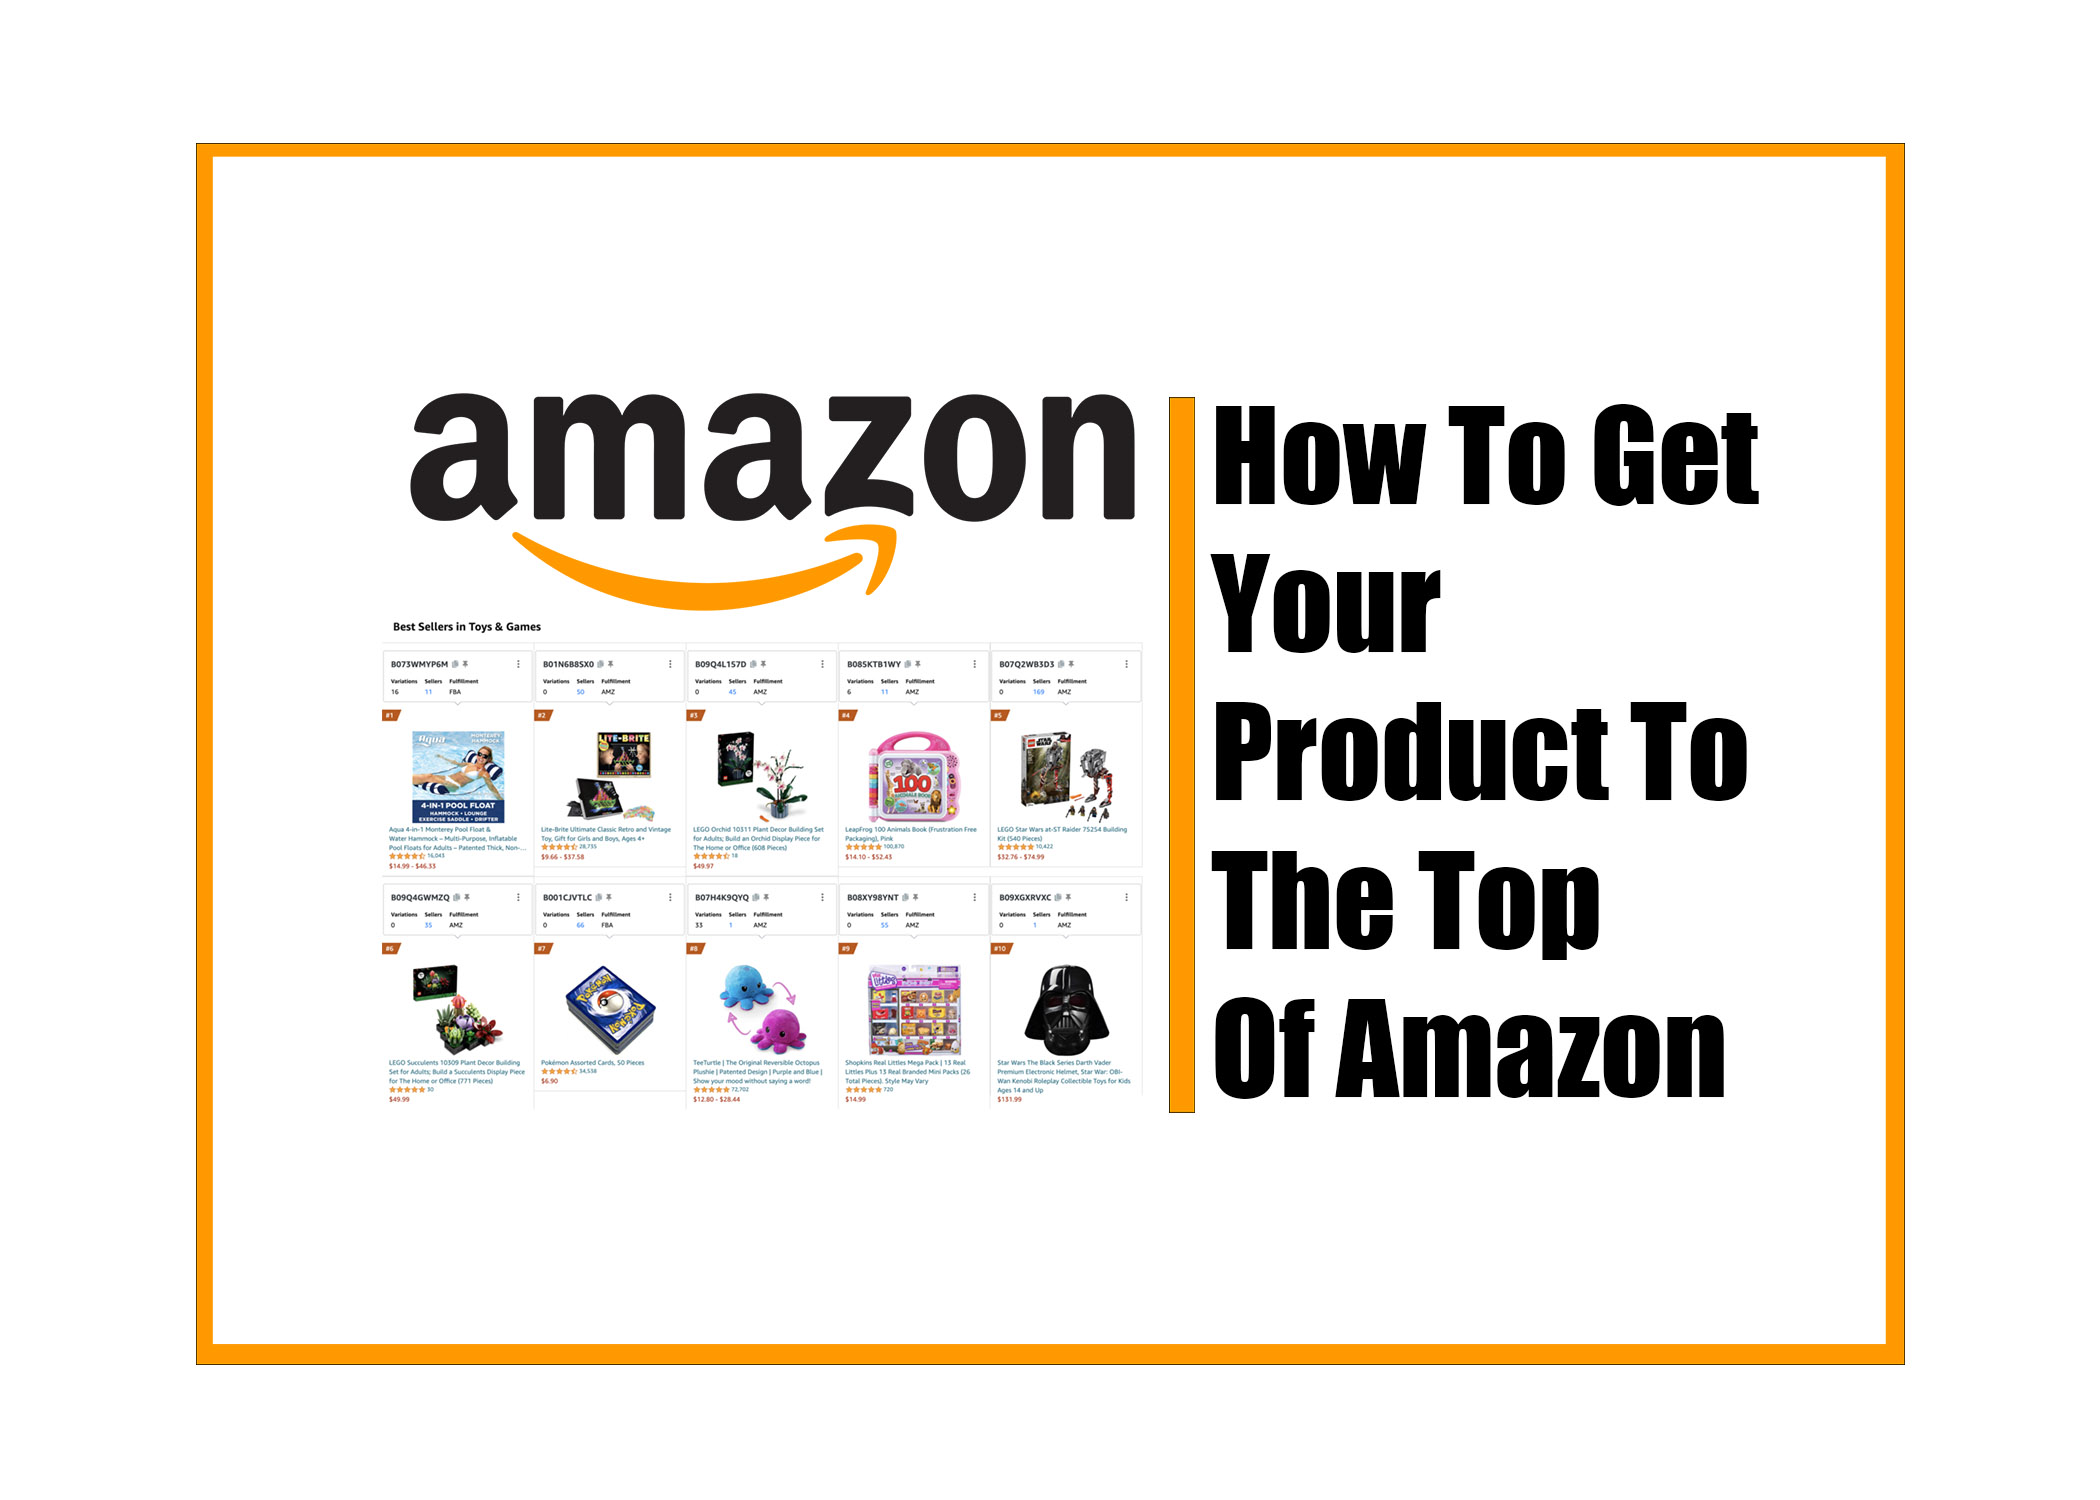 How To Get Your Product To The Top Of Amazon